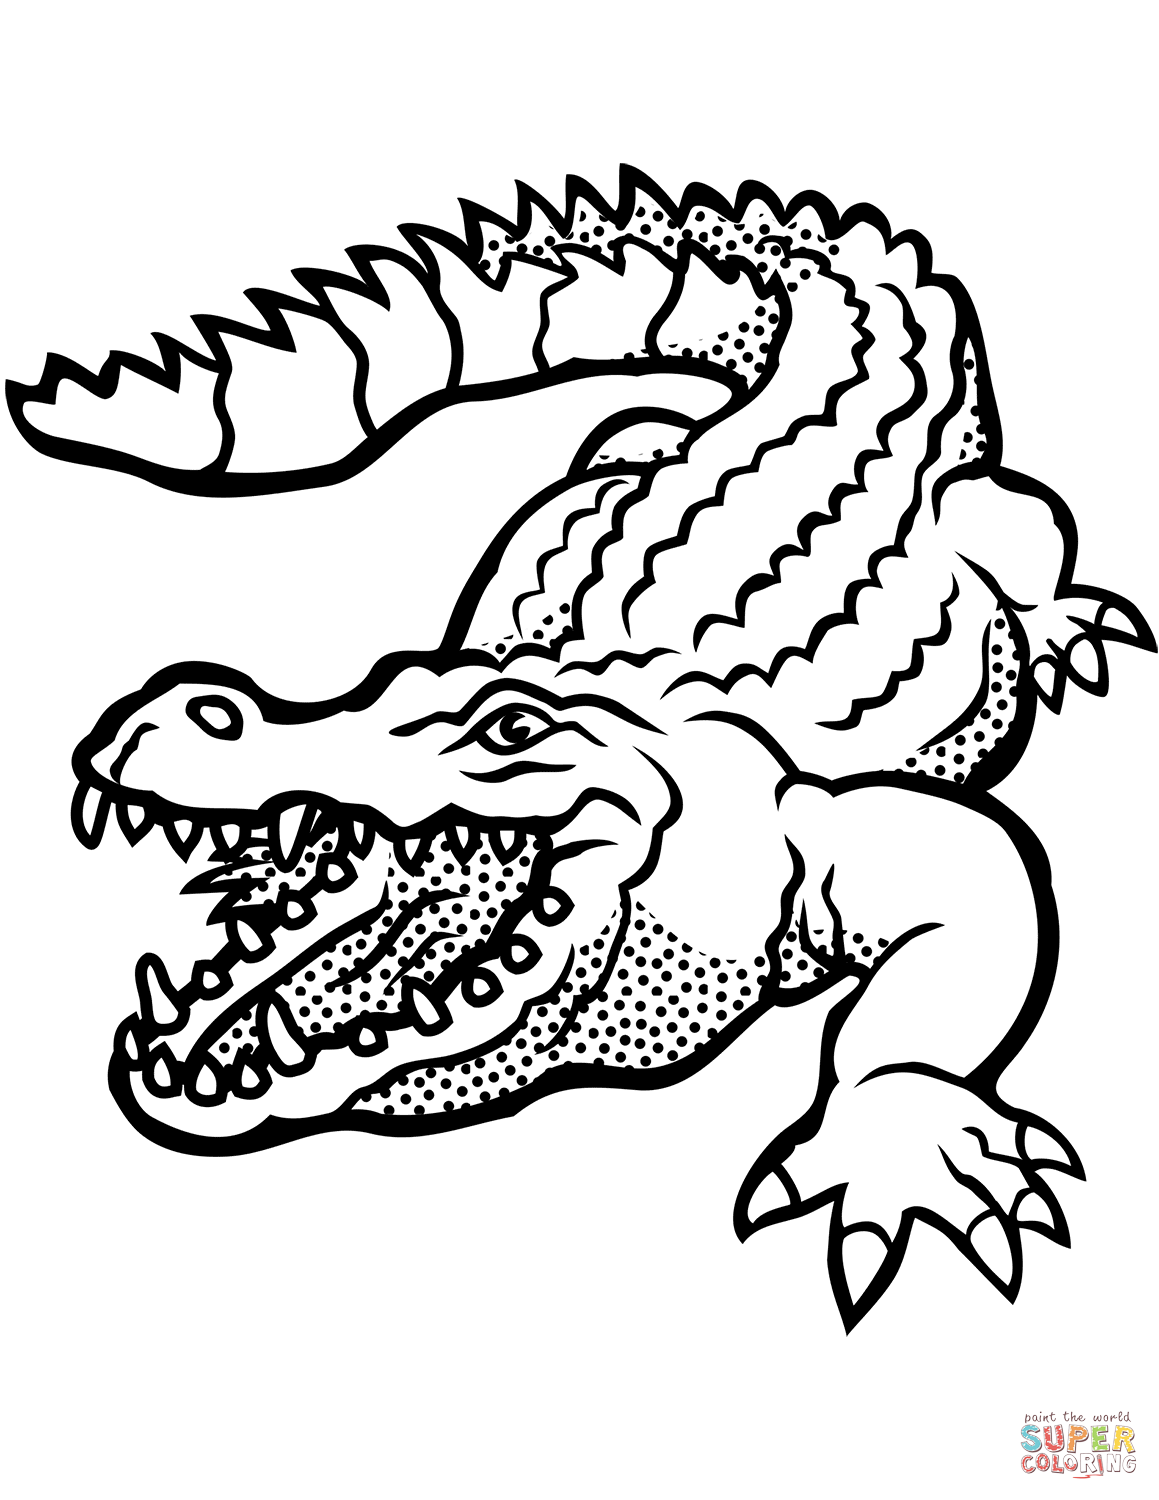 Crocodile with Open Mouth coloring page | Free Printable Coloring Pages